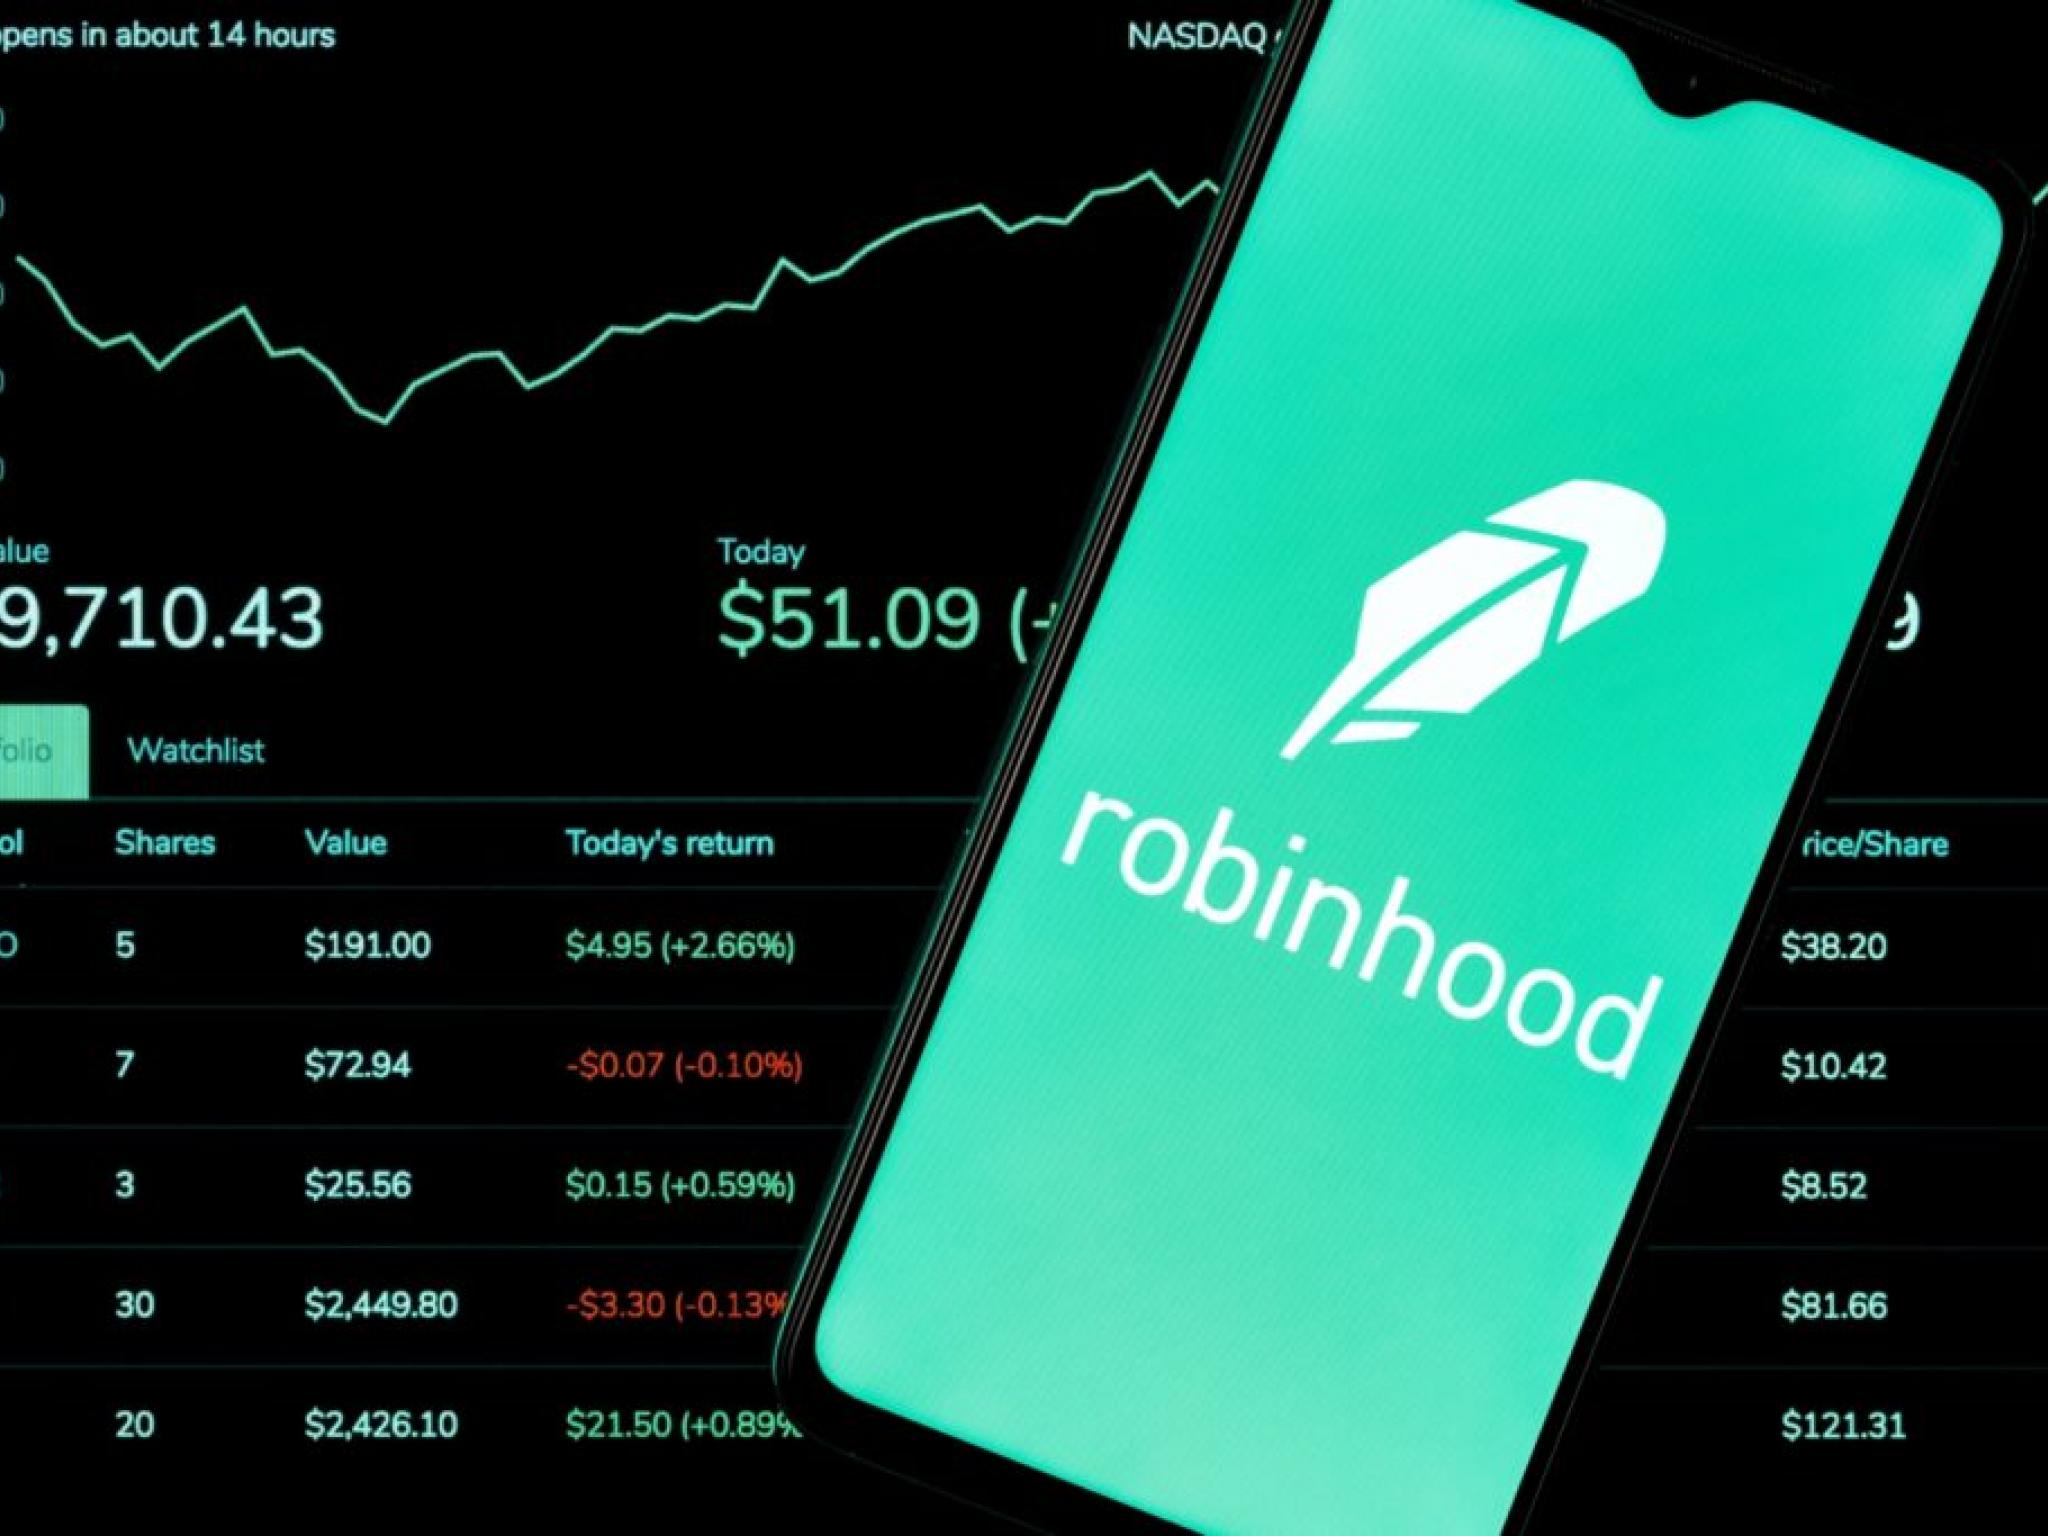  this-robinhood-analyst-turns-bullish-here-are-top-5-upgrades-for-wednesday 